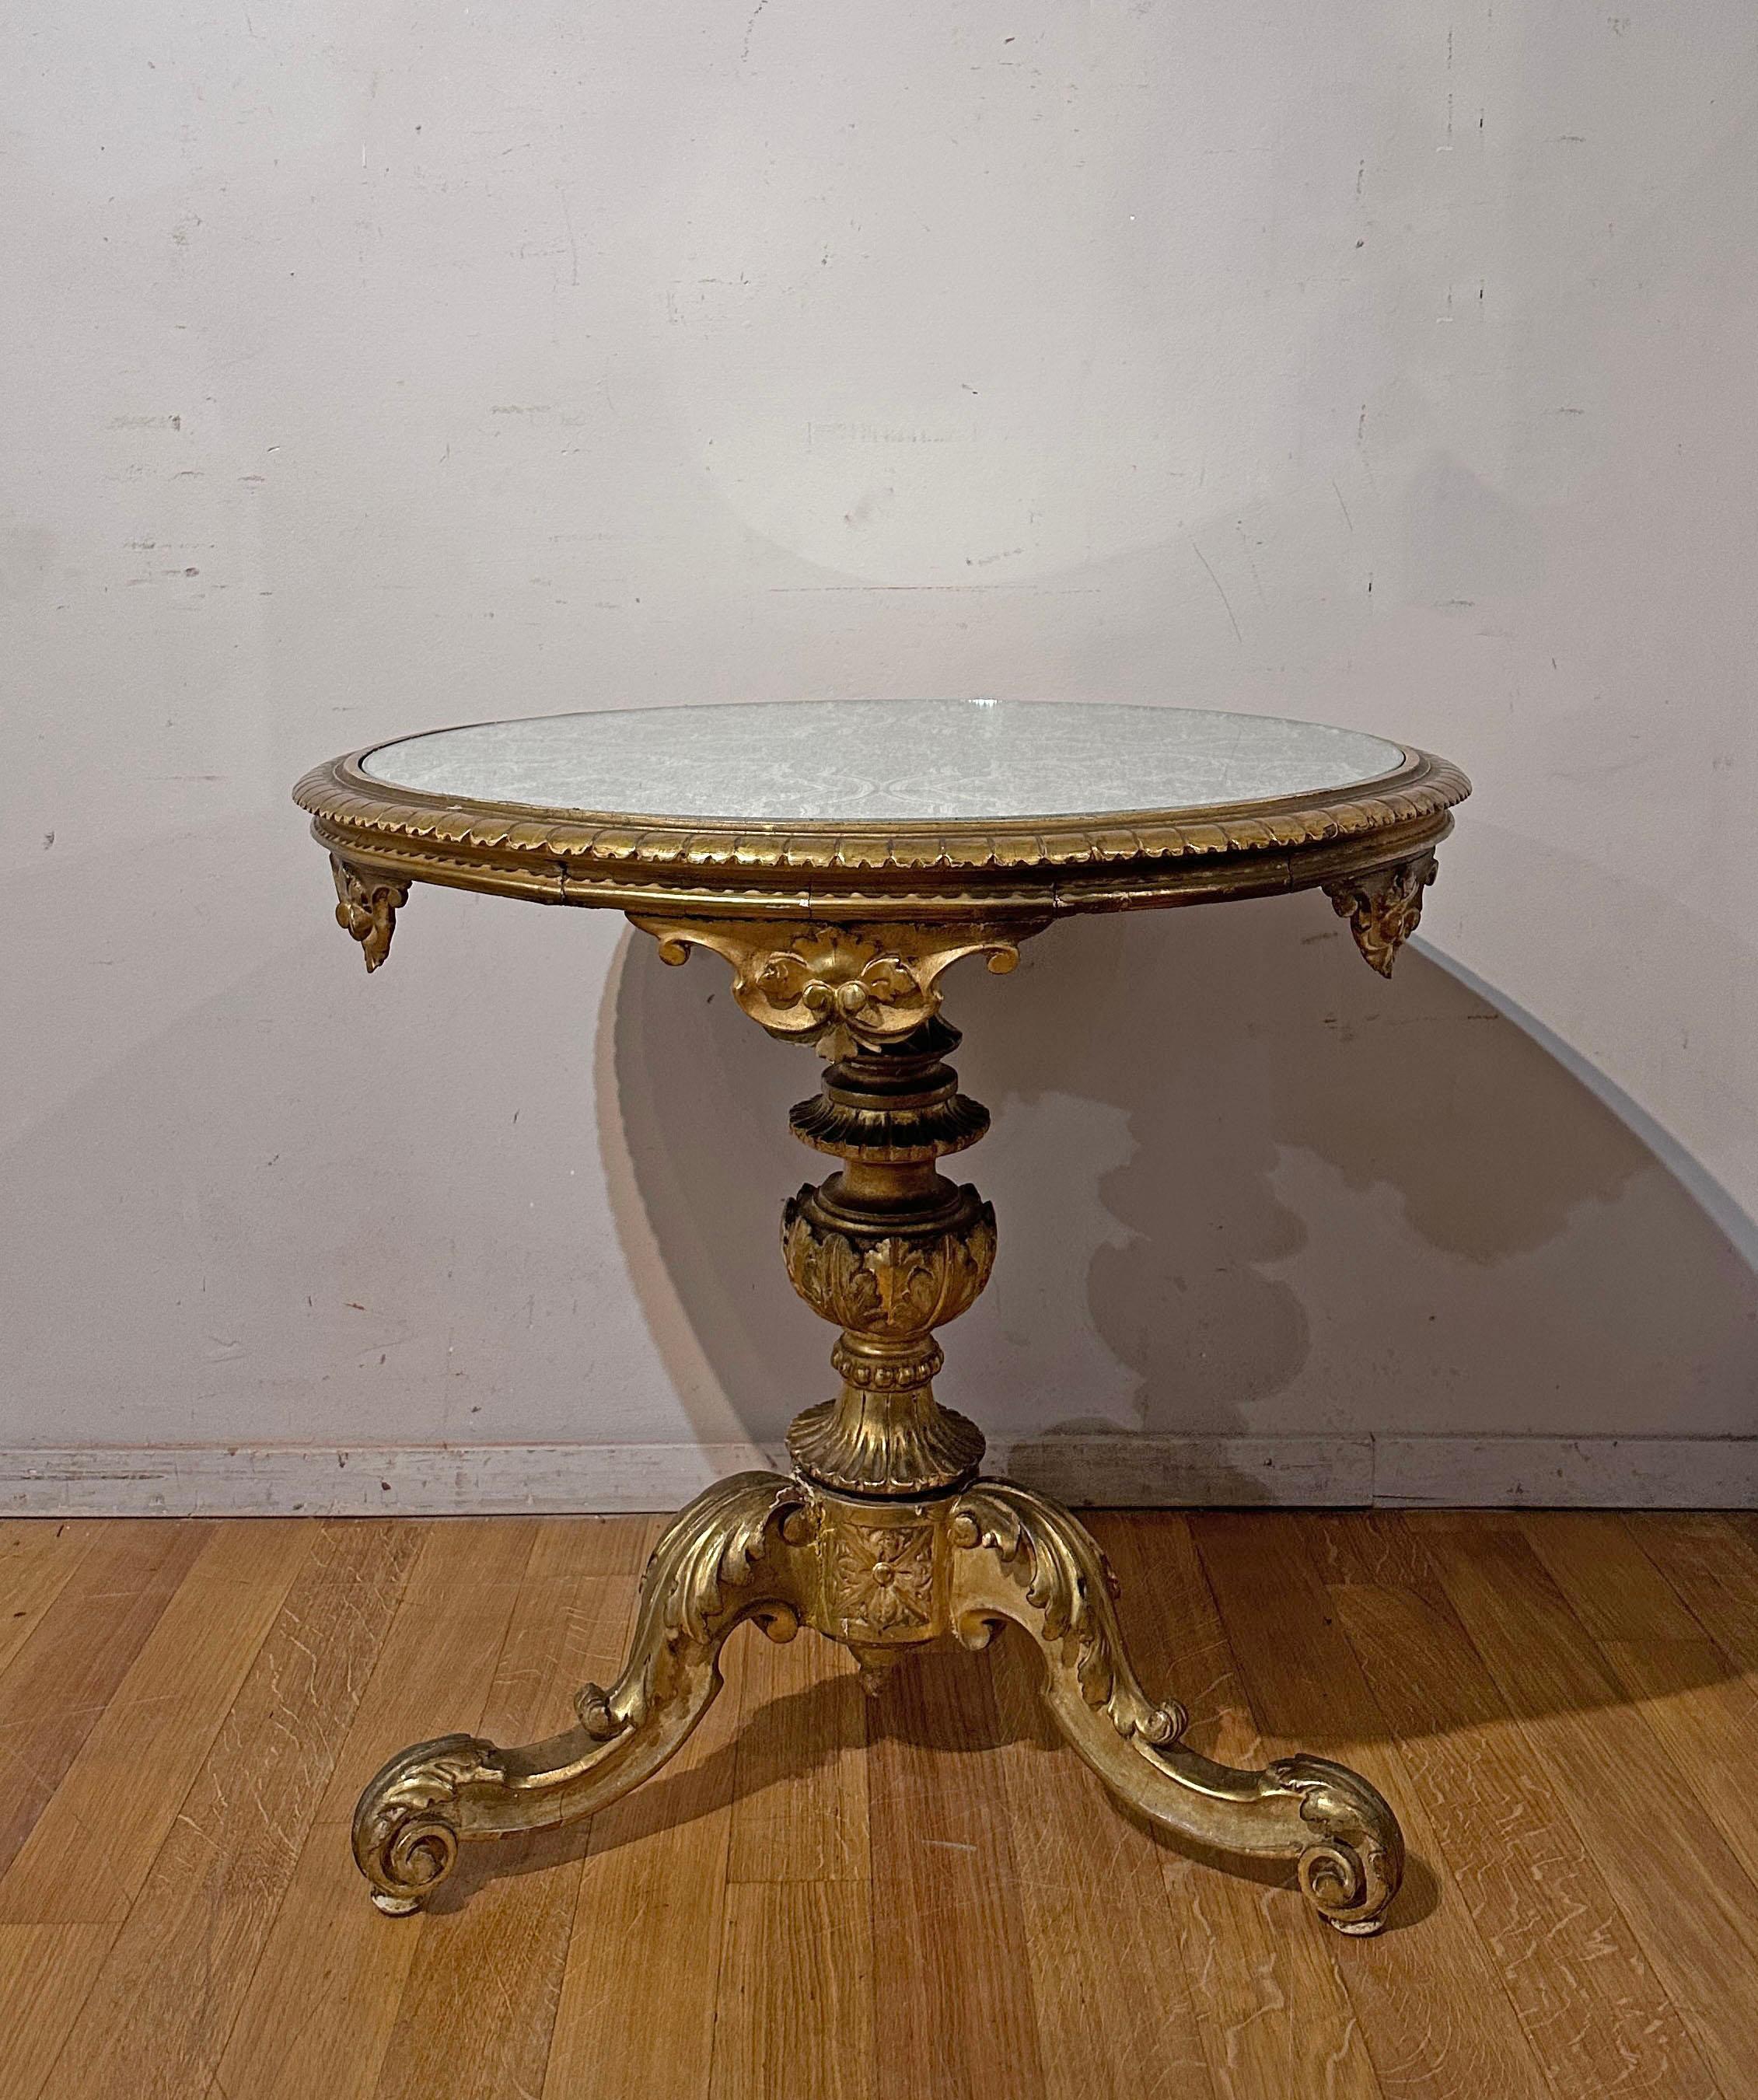 This tea table, made of fine carved wood and subsequently gilded with pure gold leaf, is an authentic masterpiece of design and craftsmanship. Characterized by a round fabric top, elegantly protected by glass, it is a true combination of